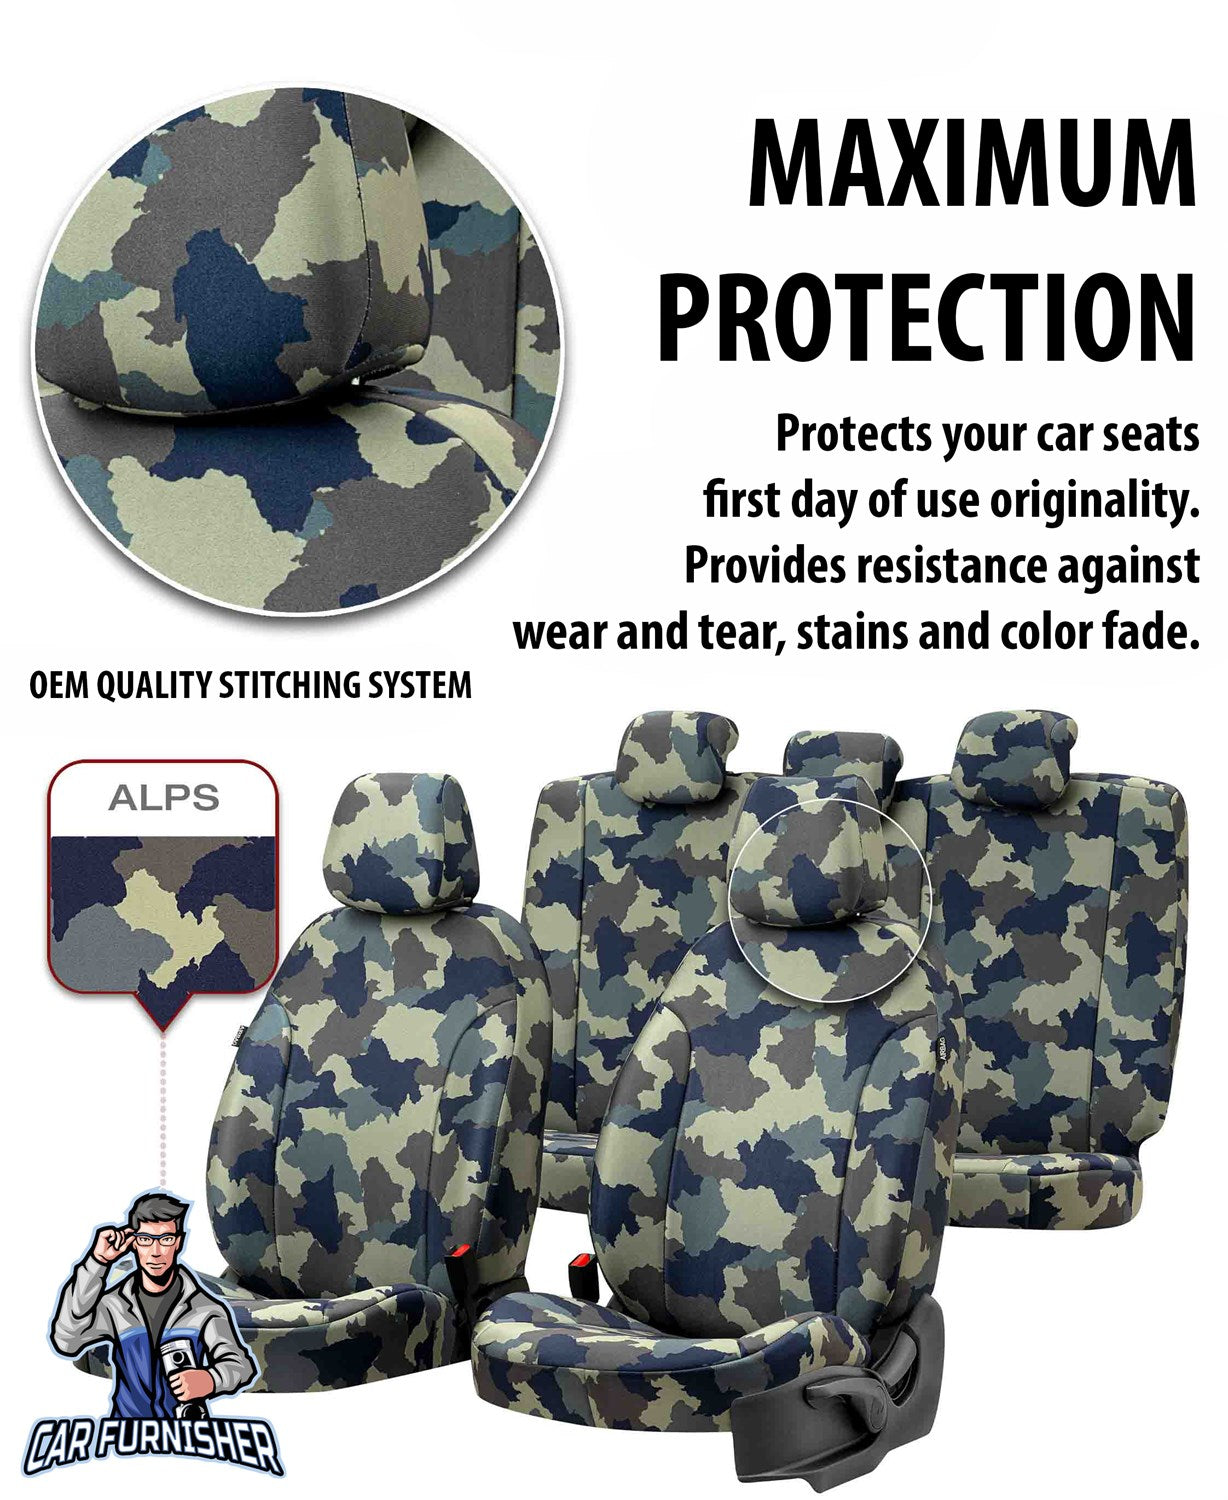 Landrover Freelander Car Seat Covers 1998-2012 Camouflage Design Alps Camo Waterproof Fabric